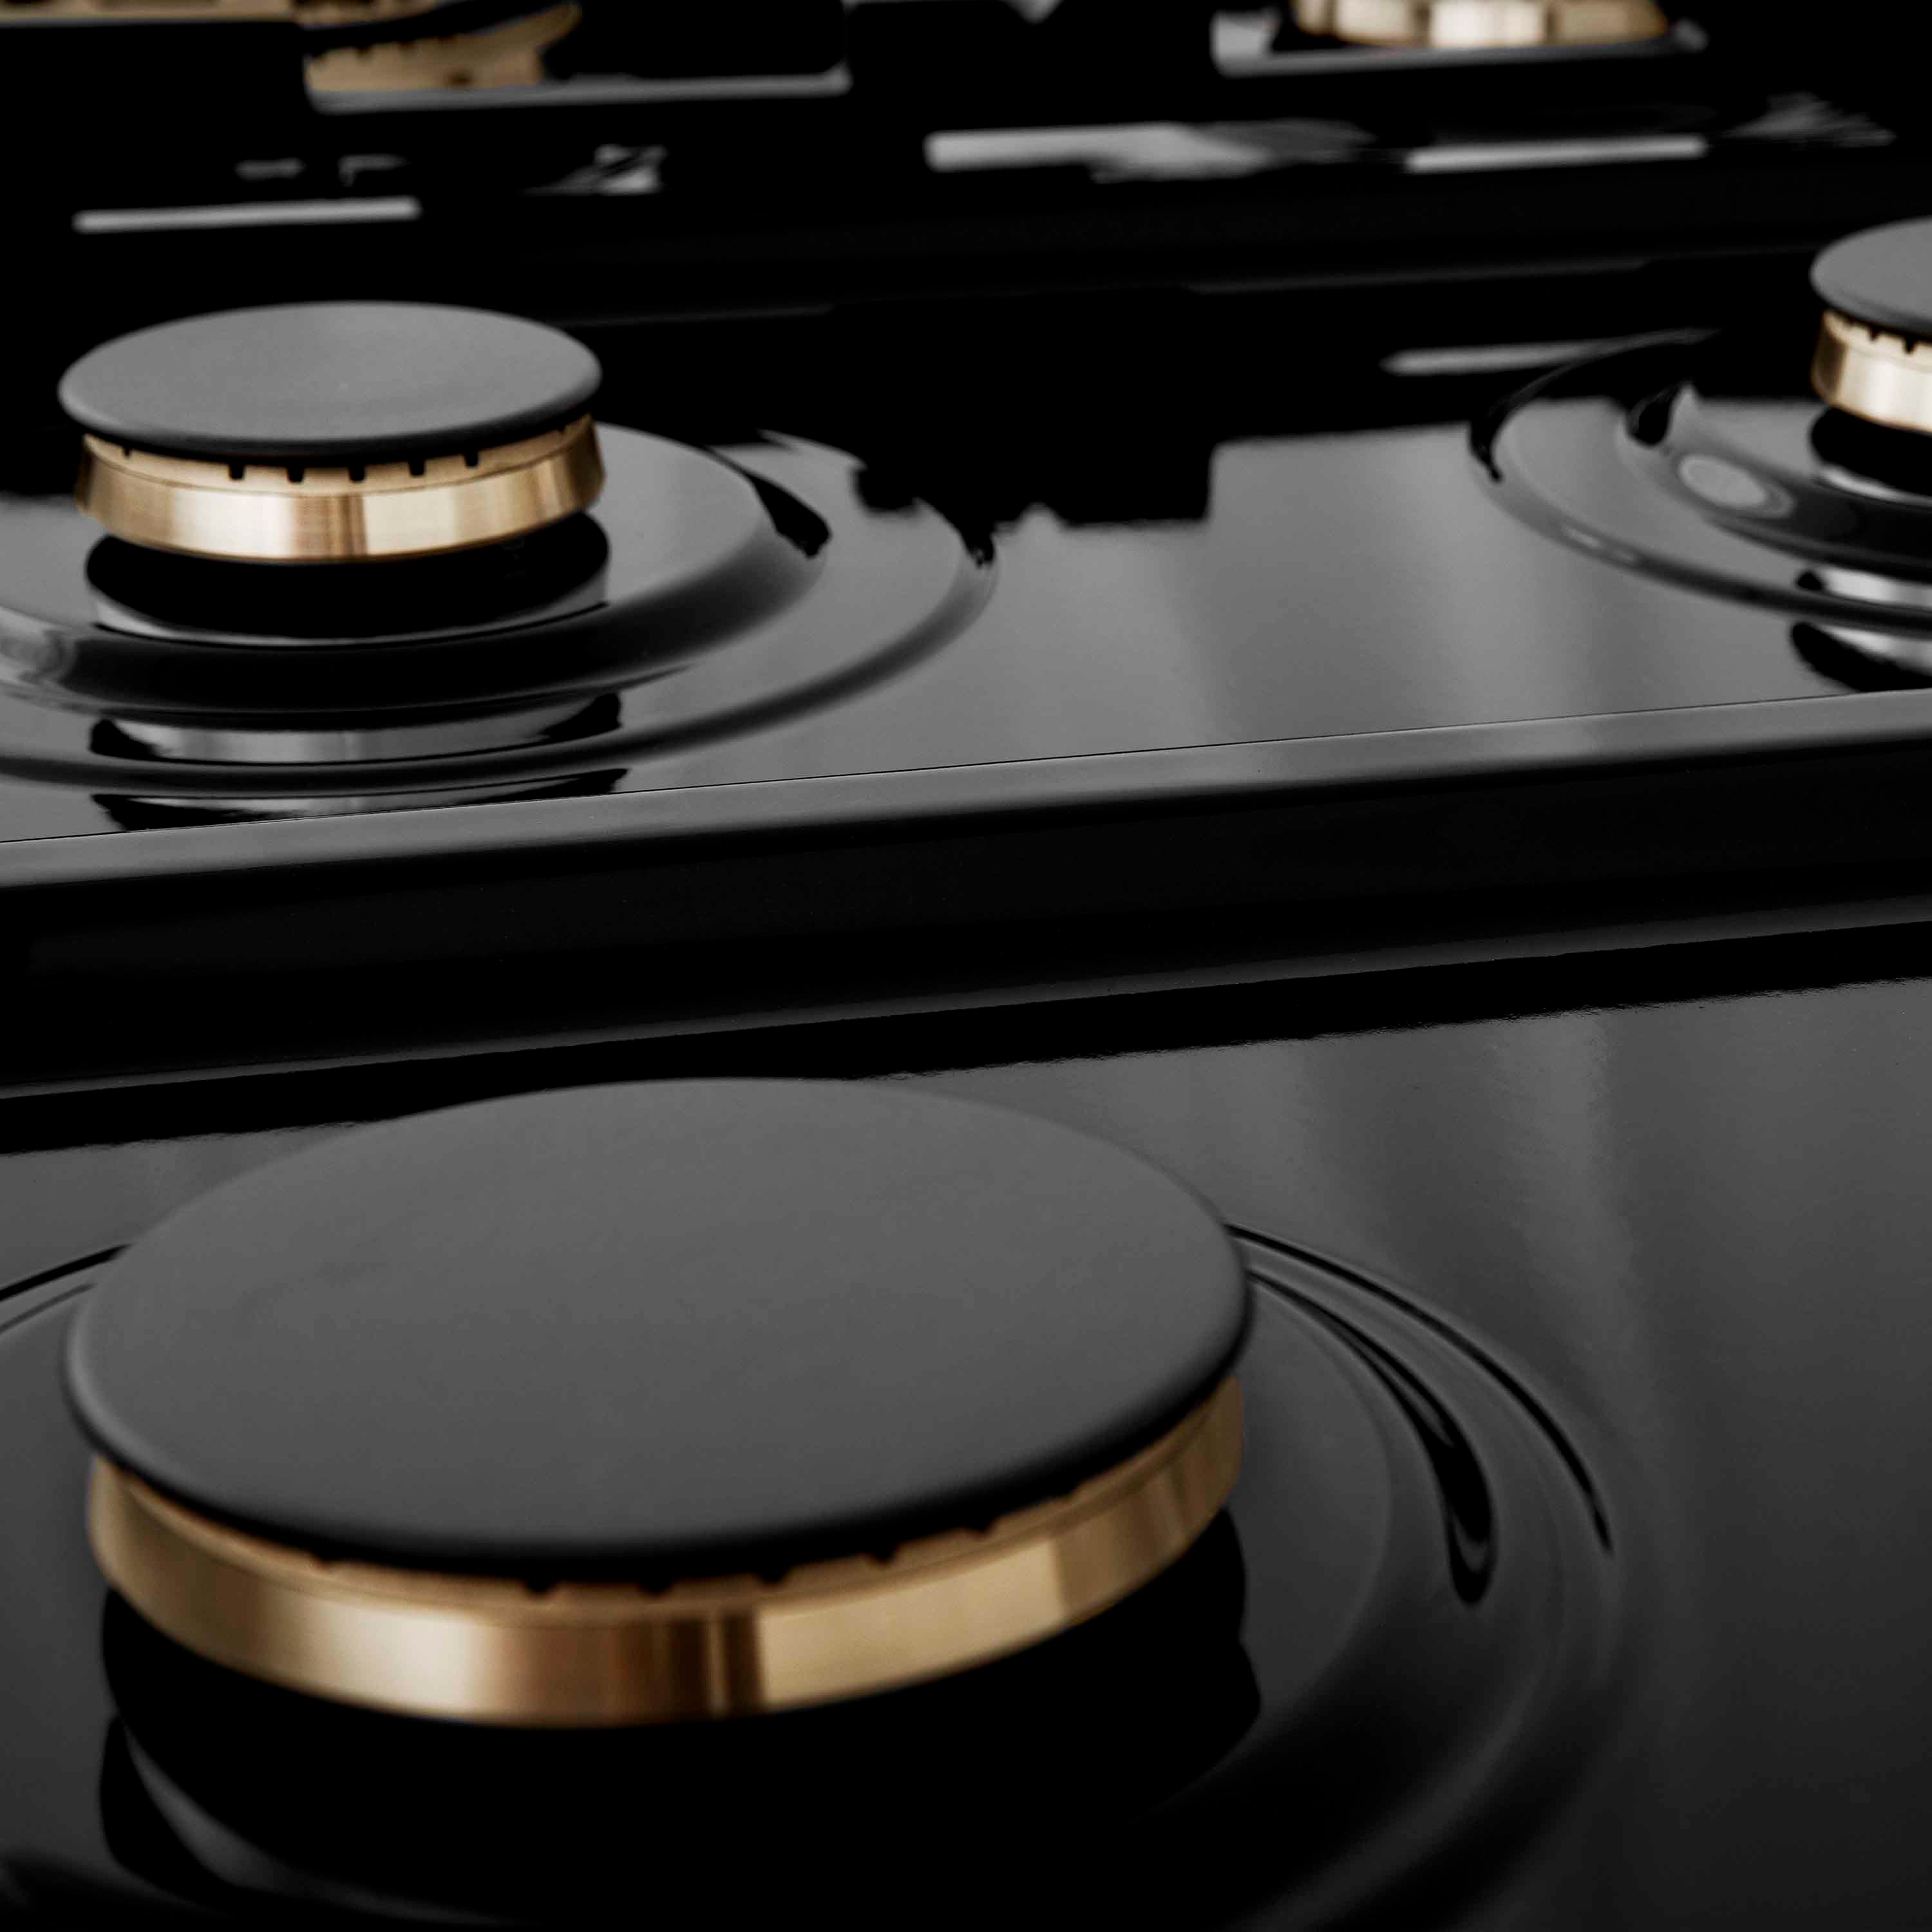 ZLINE Autograph Edition 36" Porcelain Rangetop with 6 Gas Burners in Stainless Steel and Champagne Bronze Accents (RTZ-36-CB)